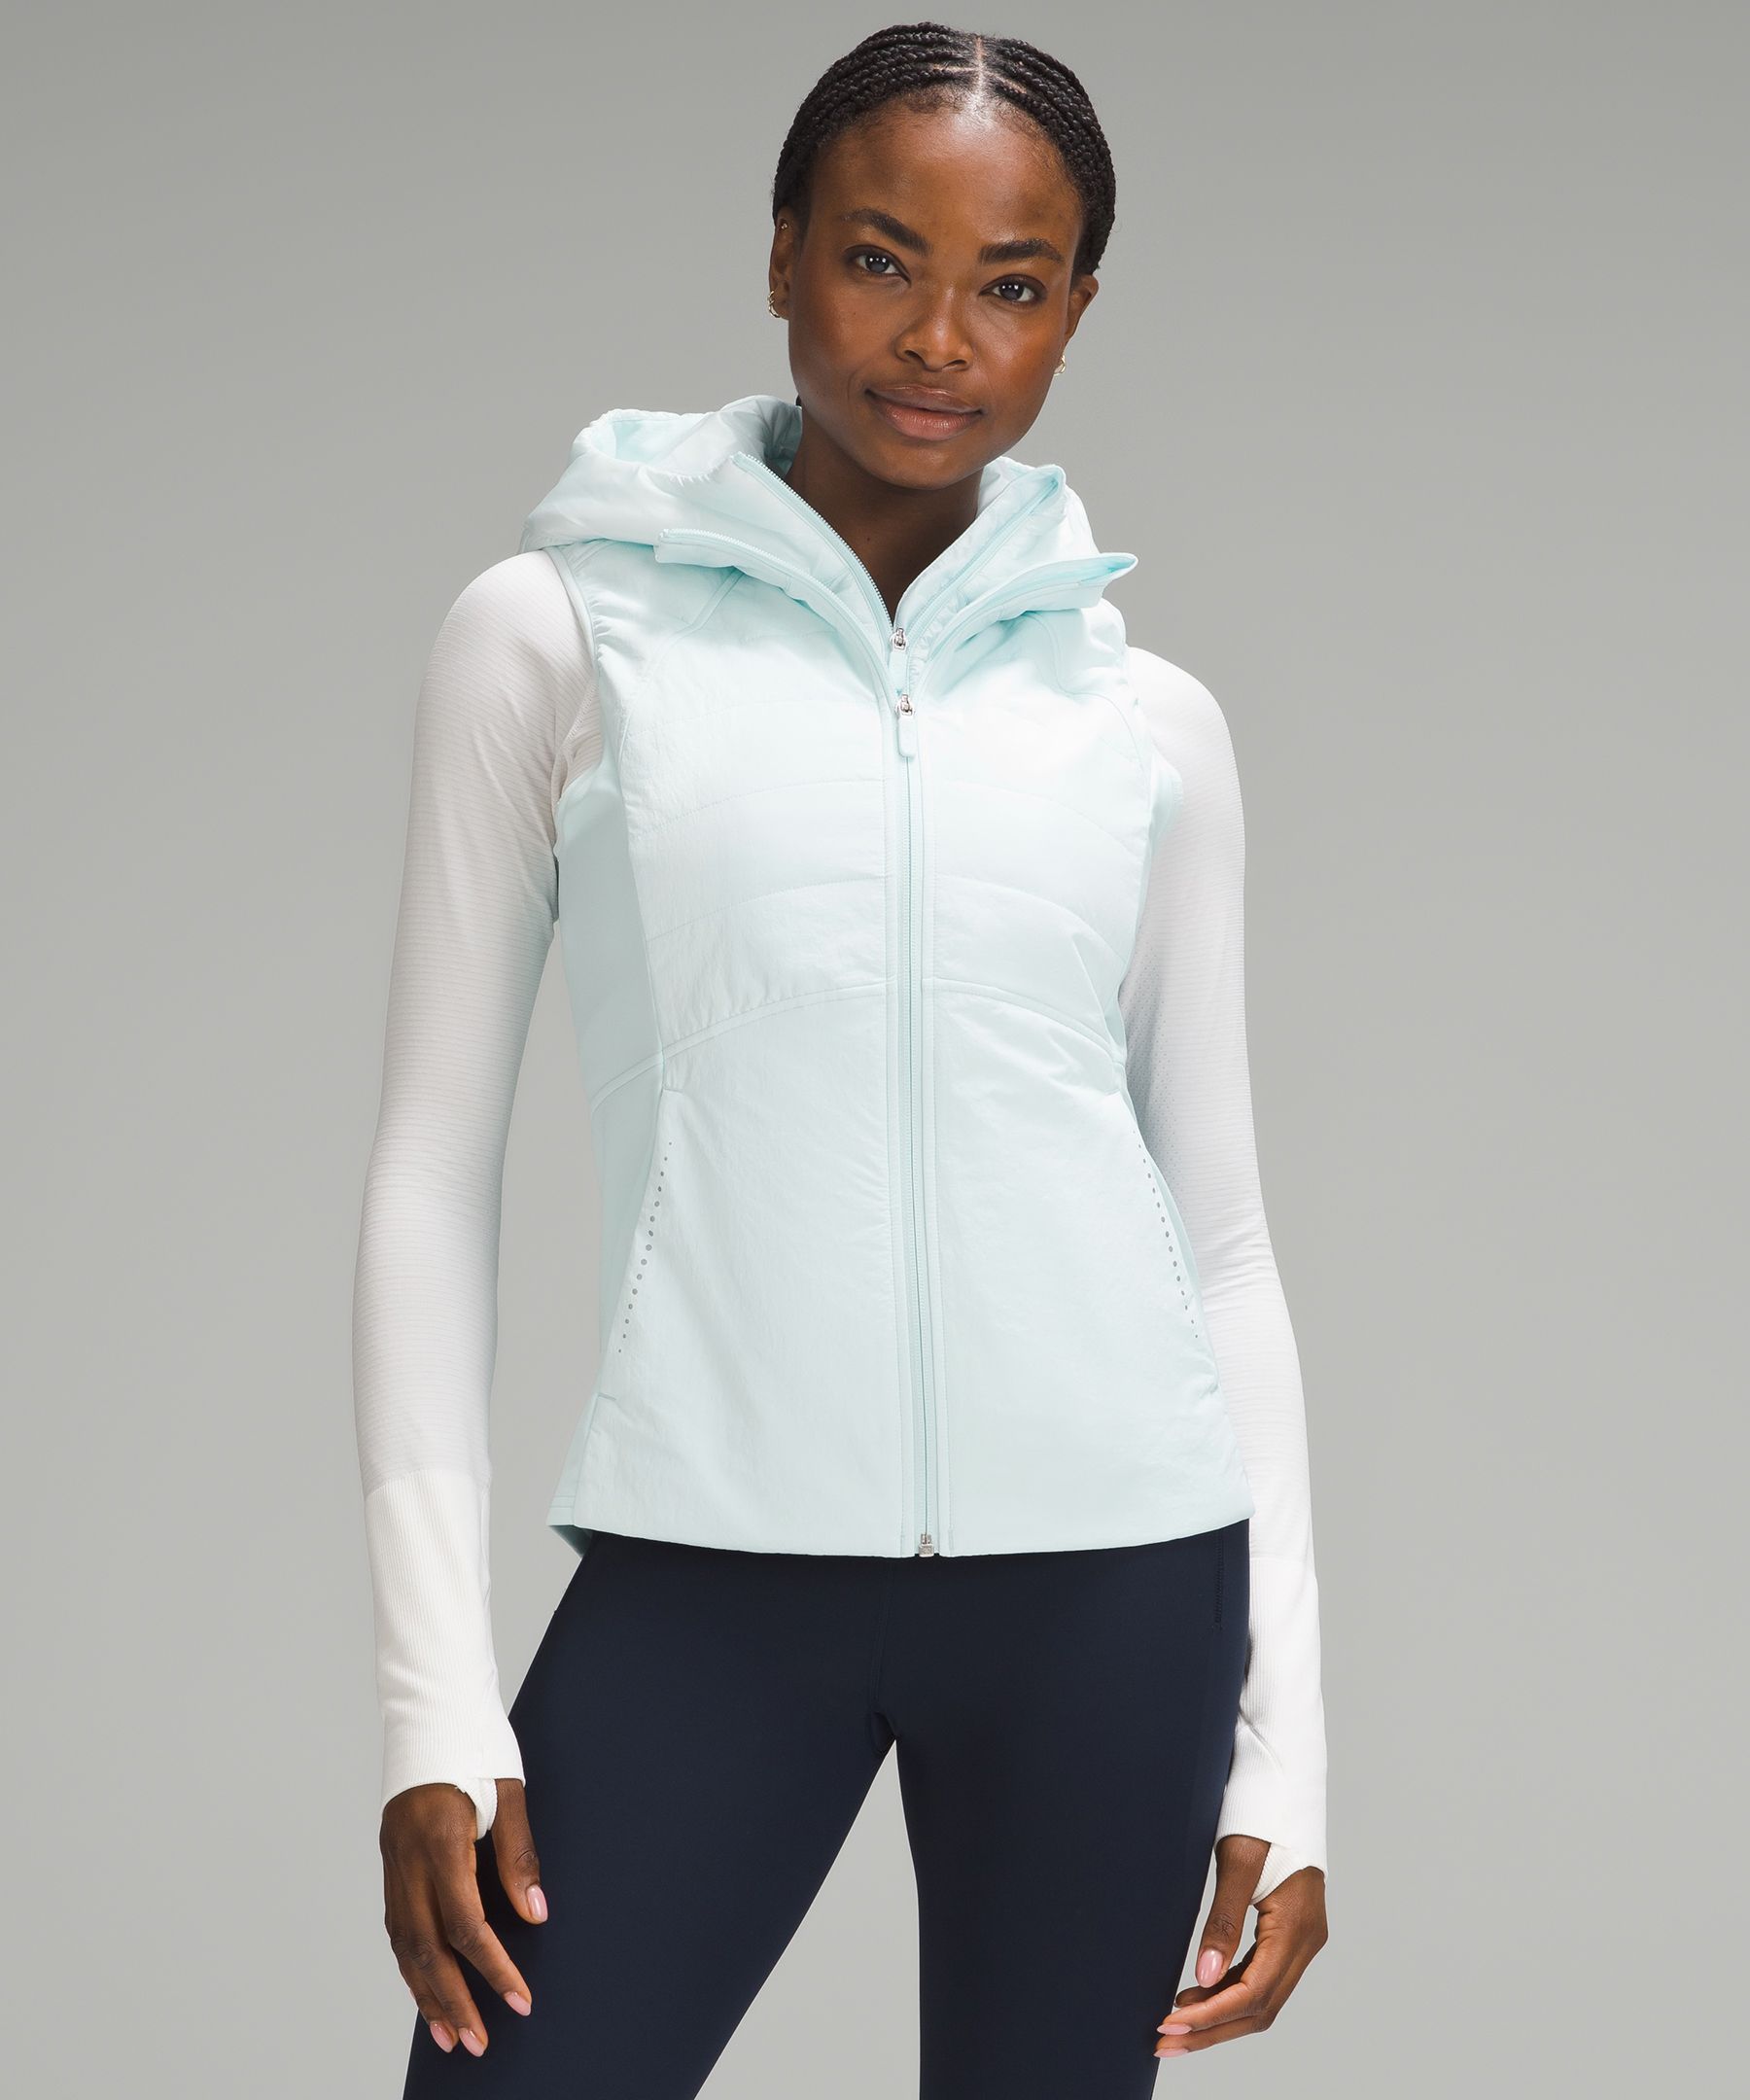 Lululemon Hooded Define Jacket Nulu, Stay Cosy This Winter With 12 Jackets  and Vests From Lululemonn